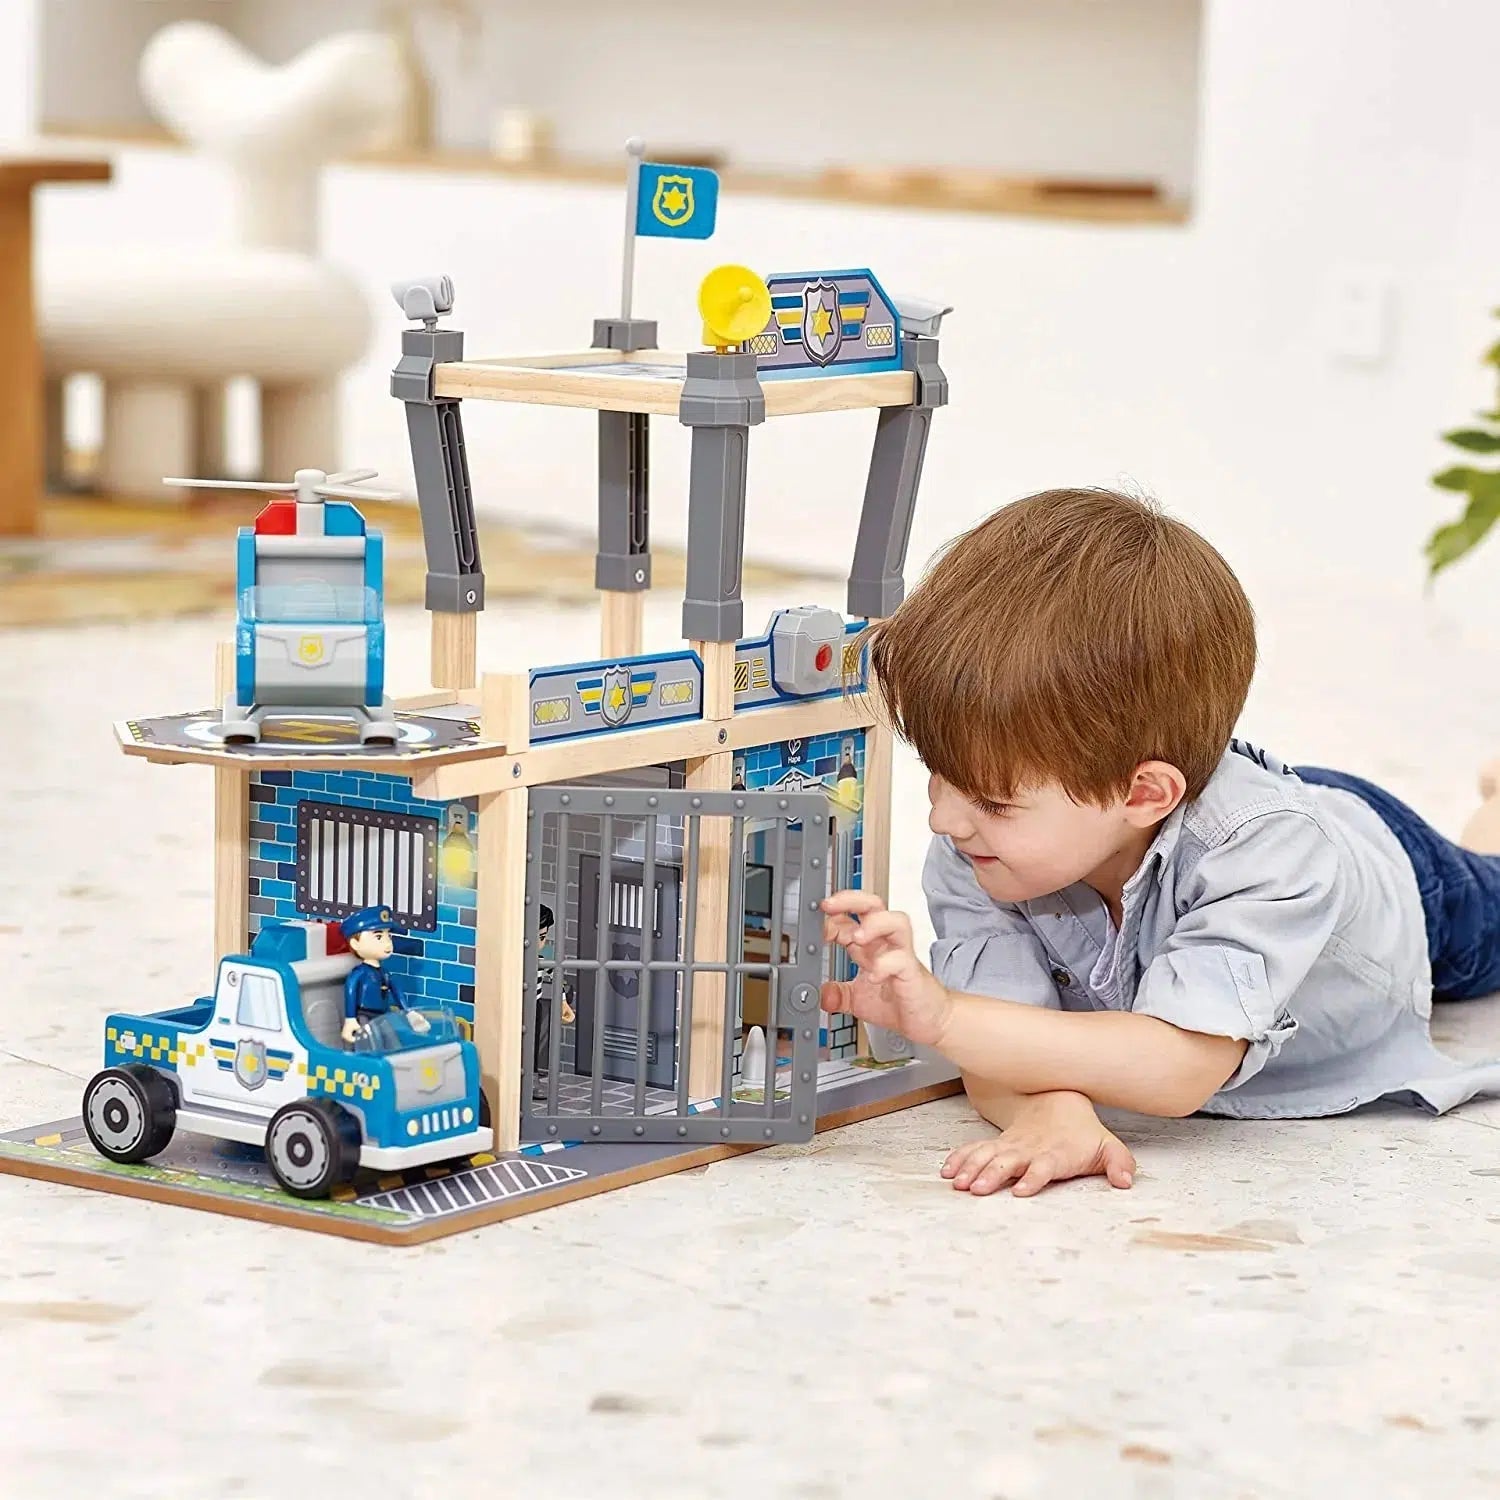 Hape-Hape Metro Police Station Play Toy Set With Sounds And Lights-E3050-Legacy Toys